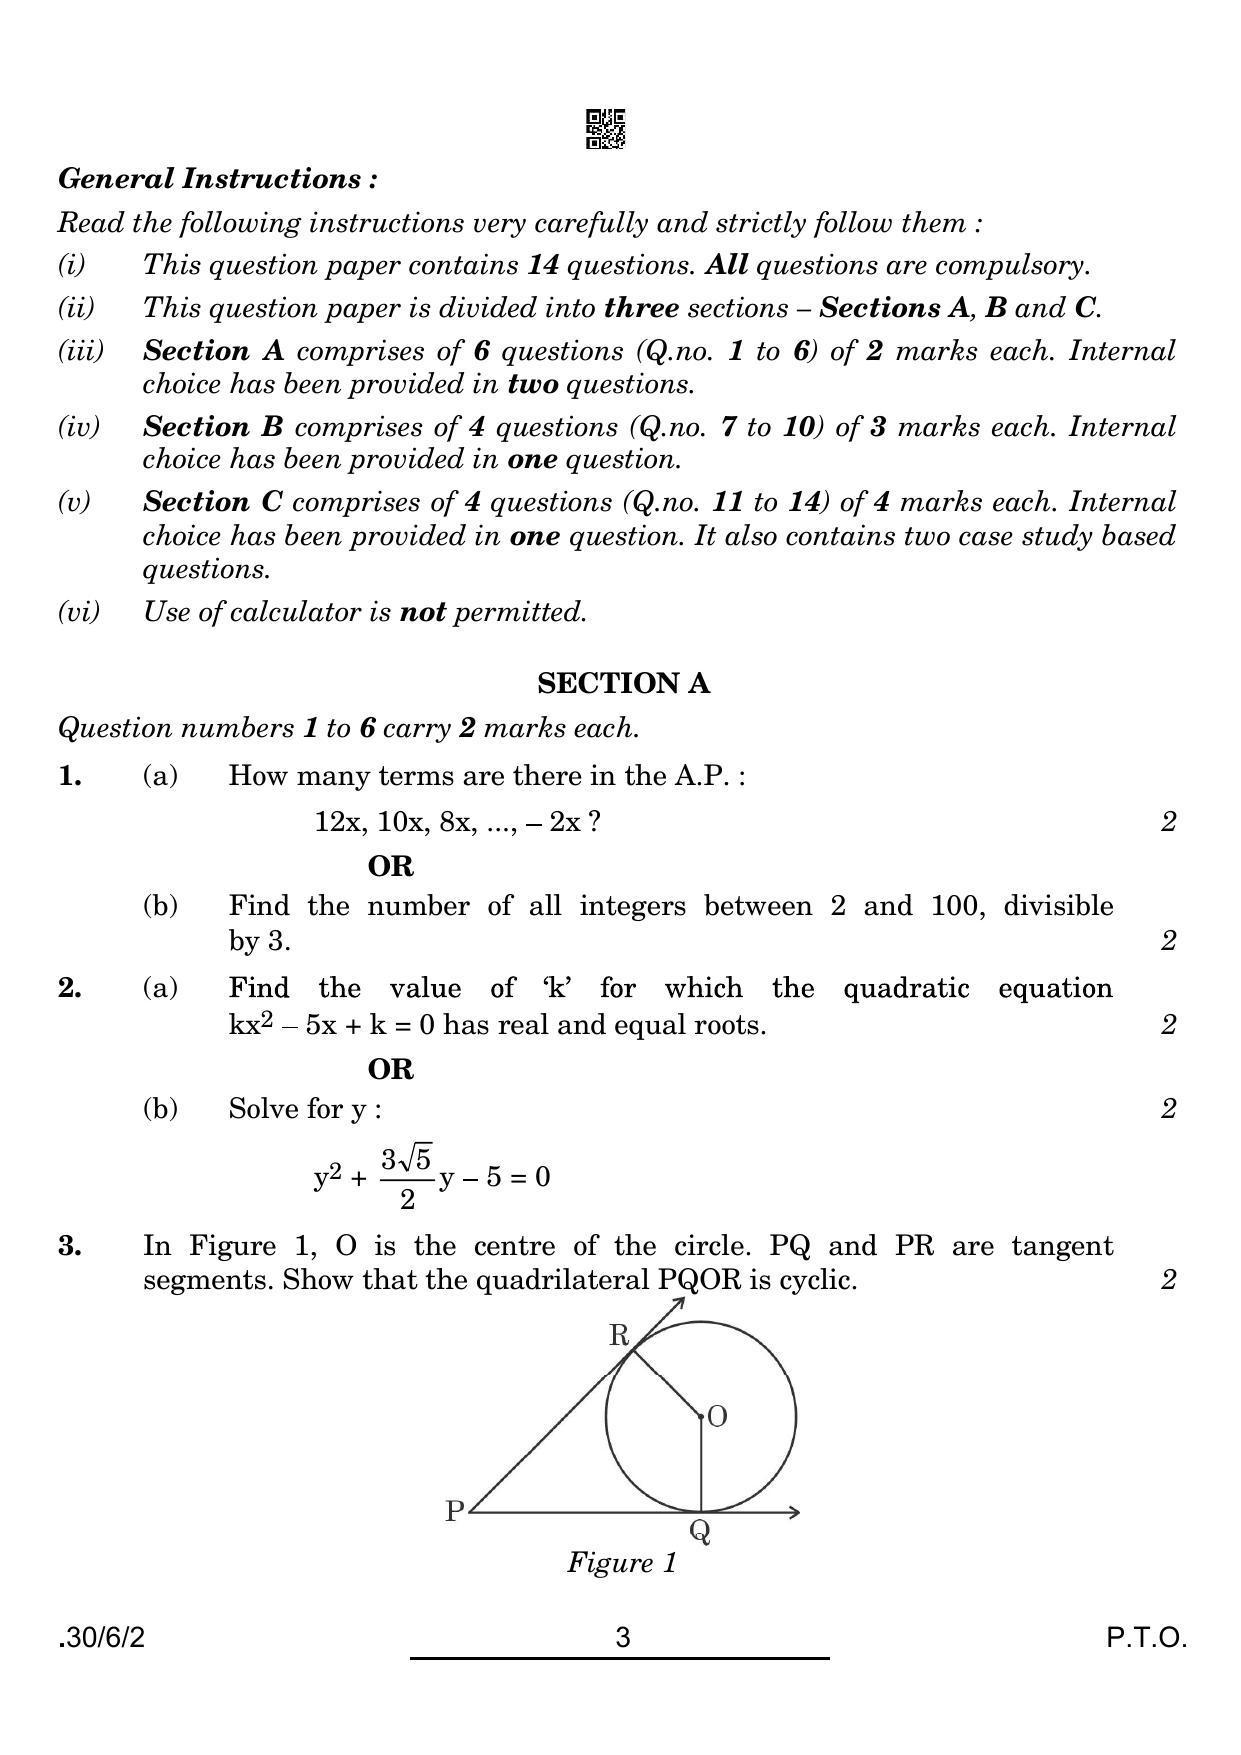 CBSE Class 10 30-6-2 Maths Std. 2022 Compartment Question Paper - Page 3